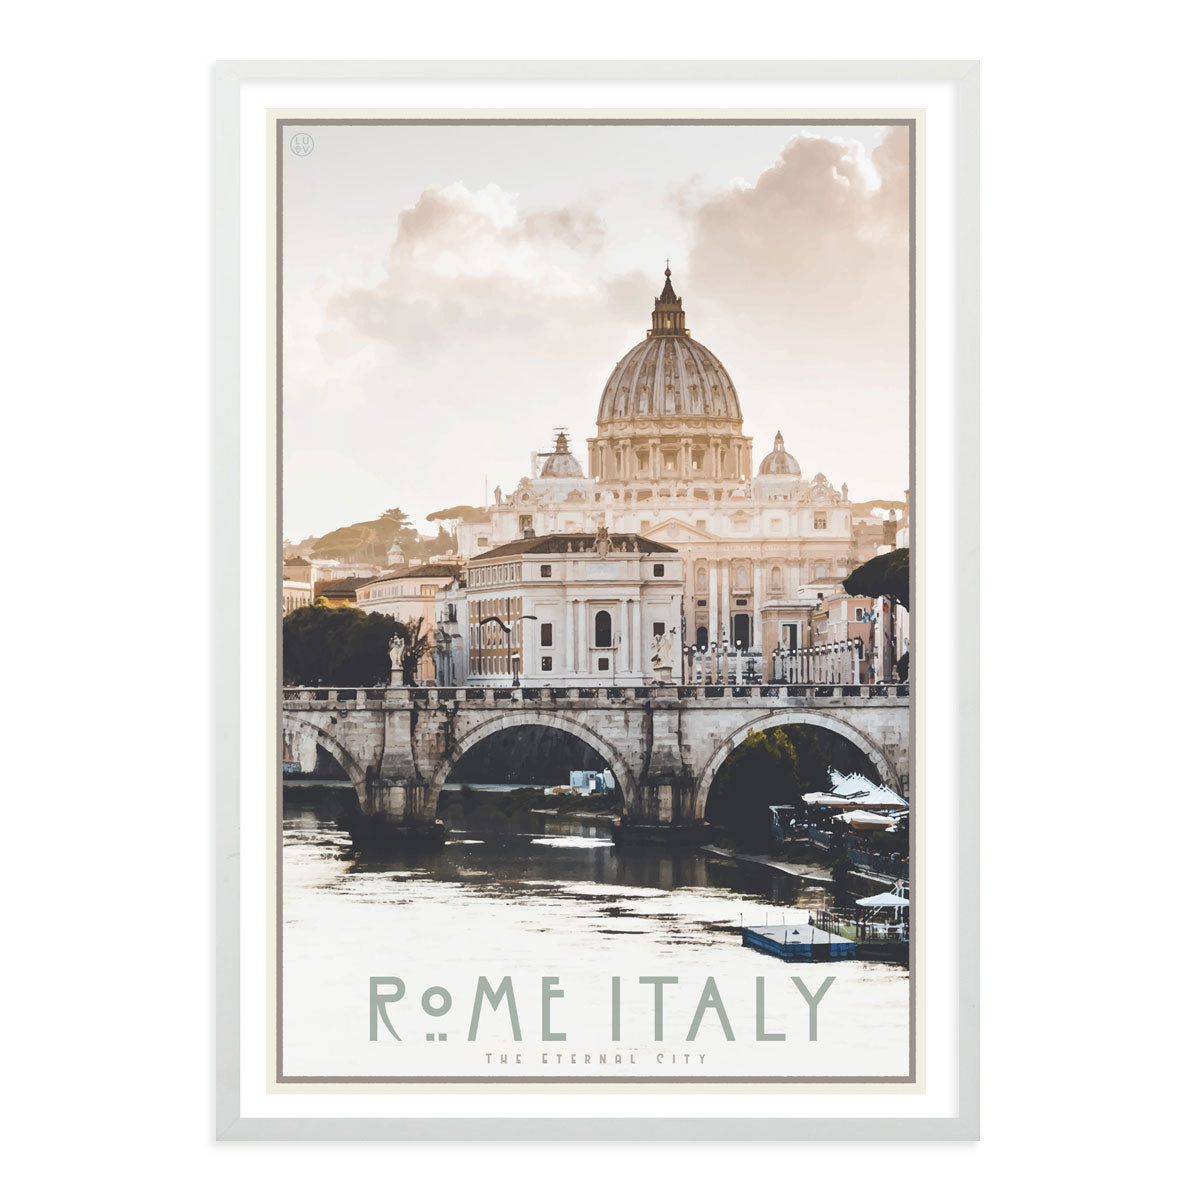 Rome Italy vintage travel style white framed poster by places we luv